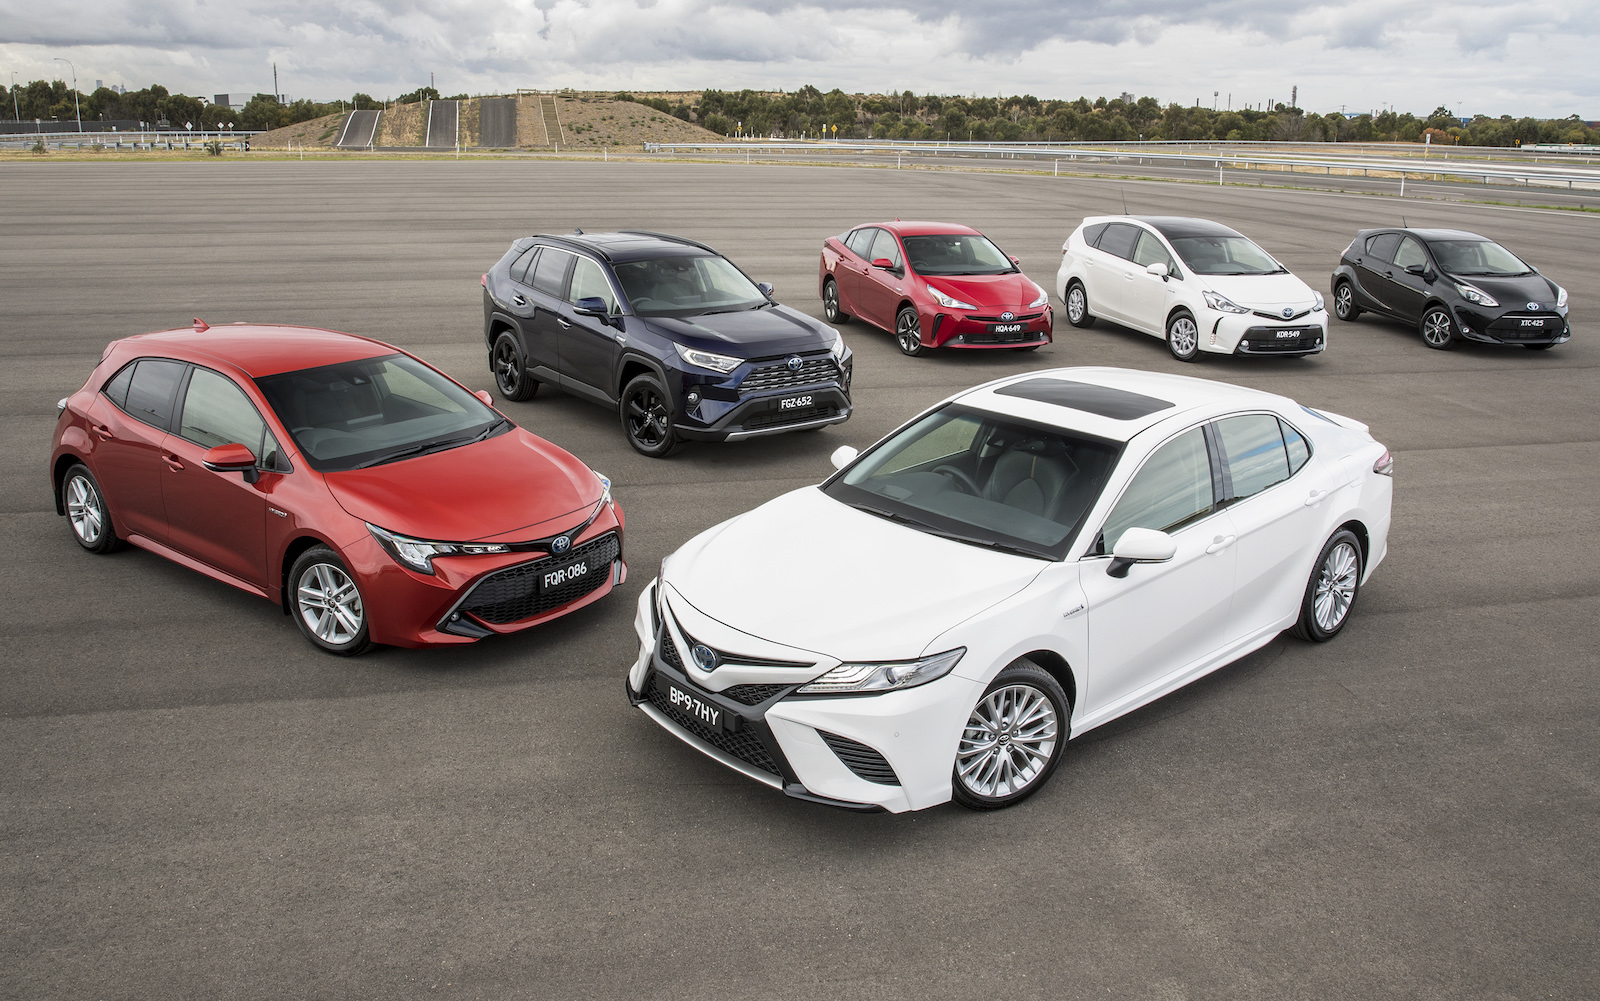 Toyota tops 2019 Trusted Brands Survey, ahead Mazda and BMW